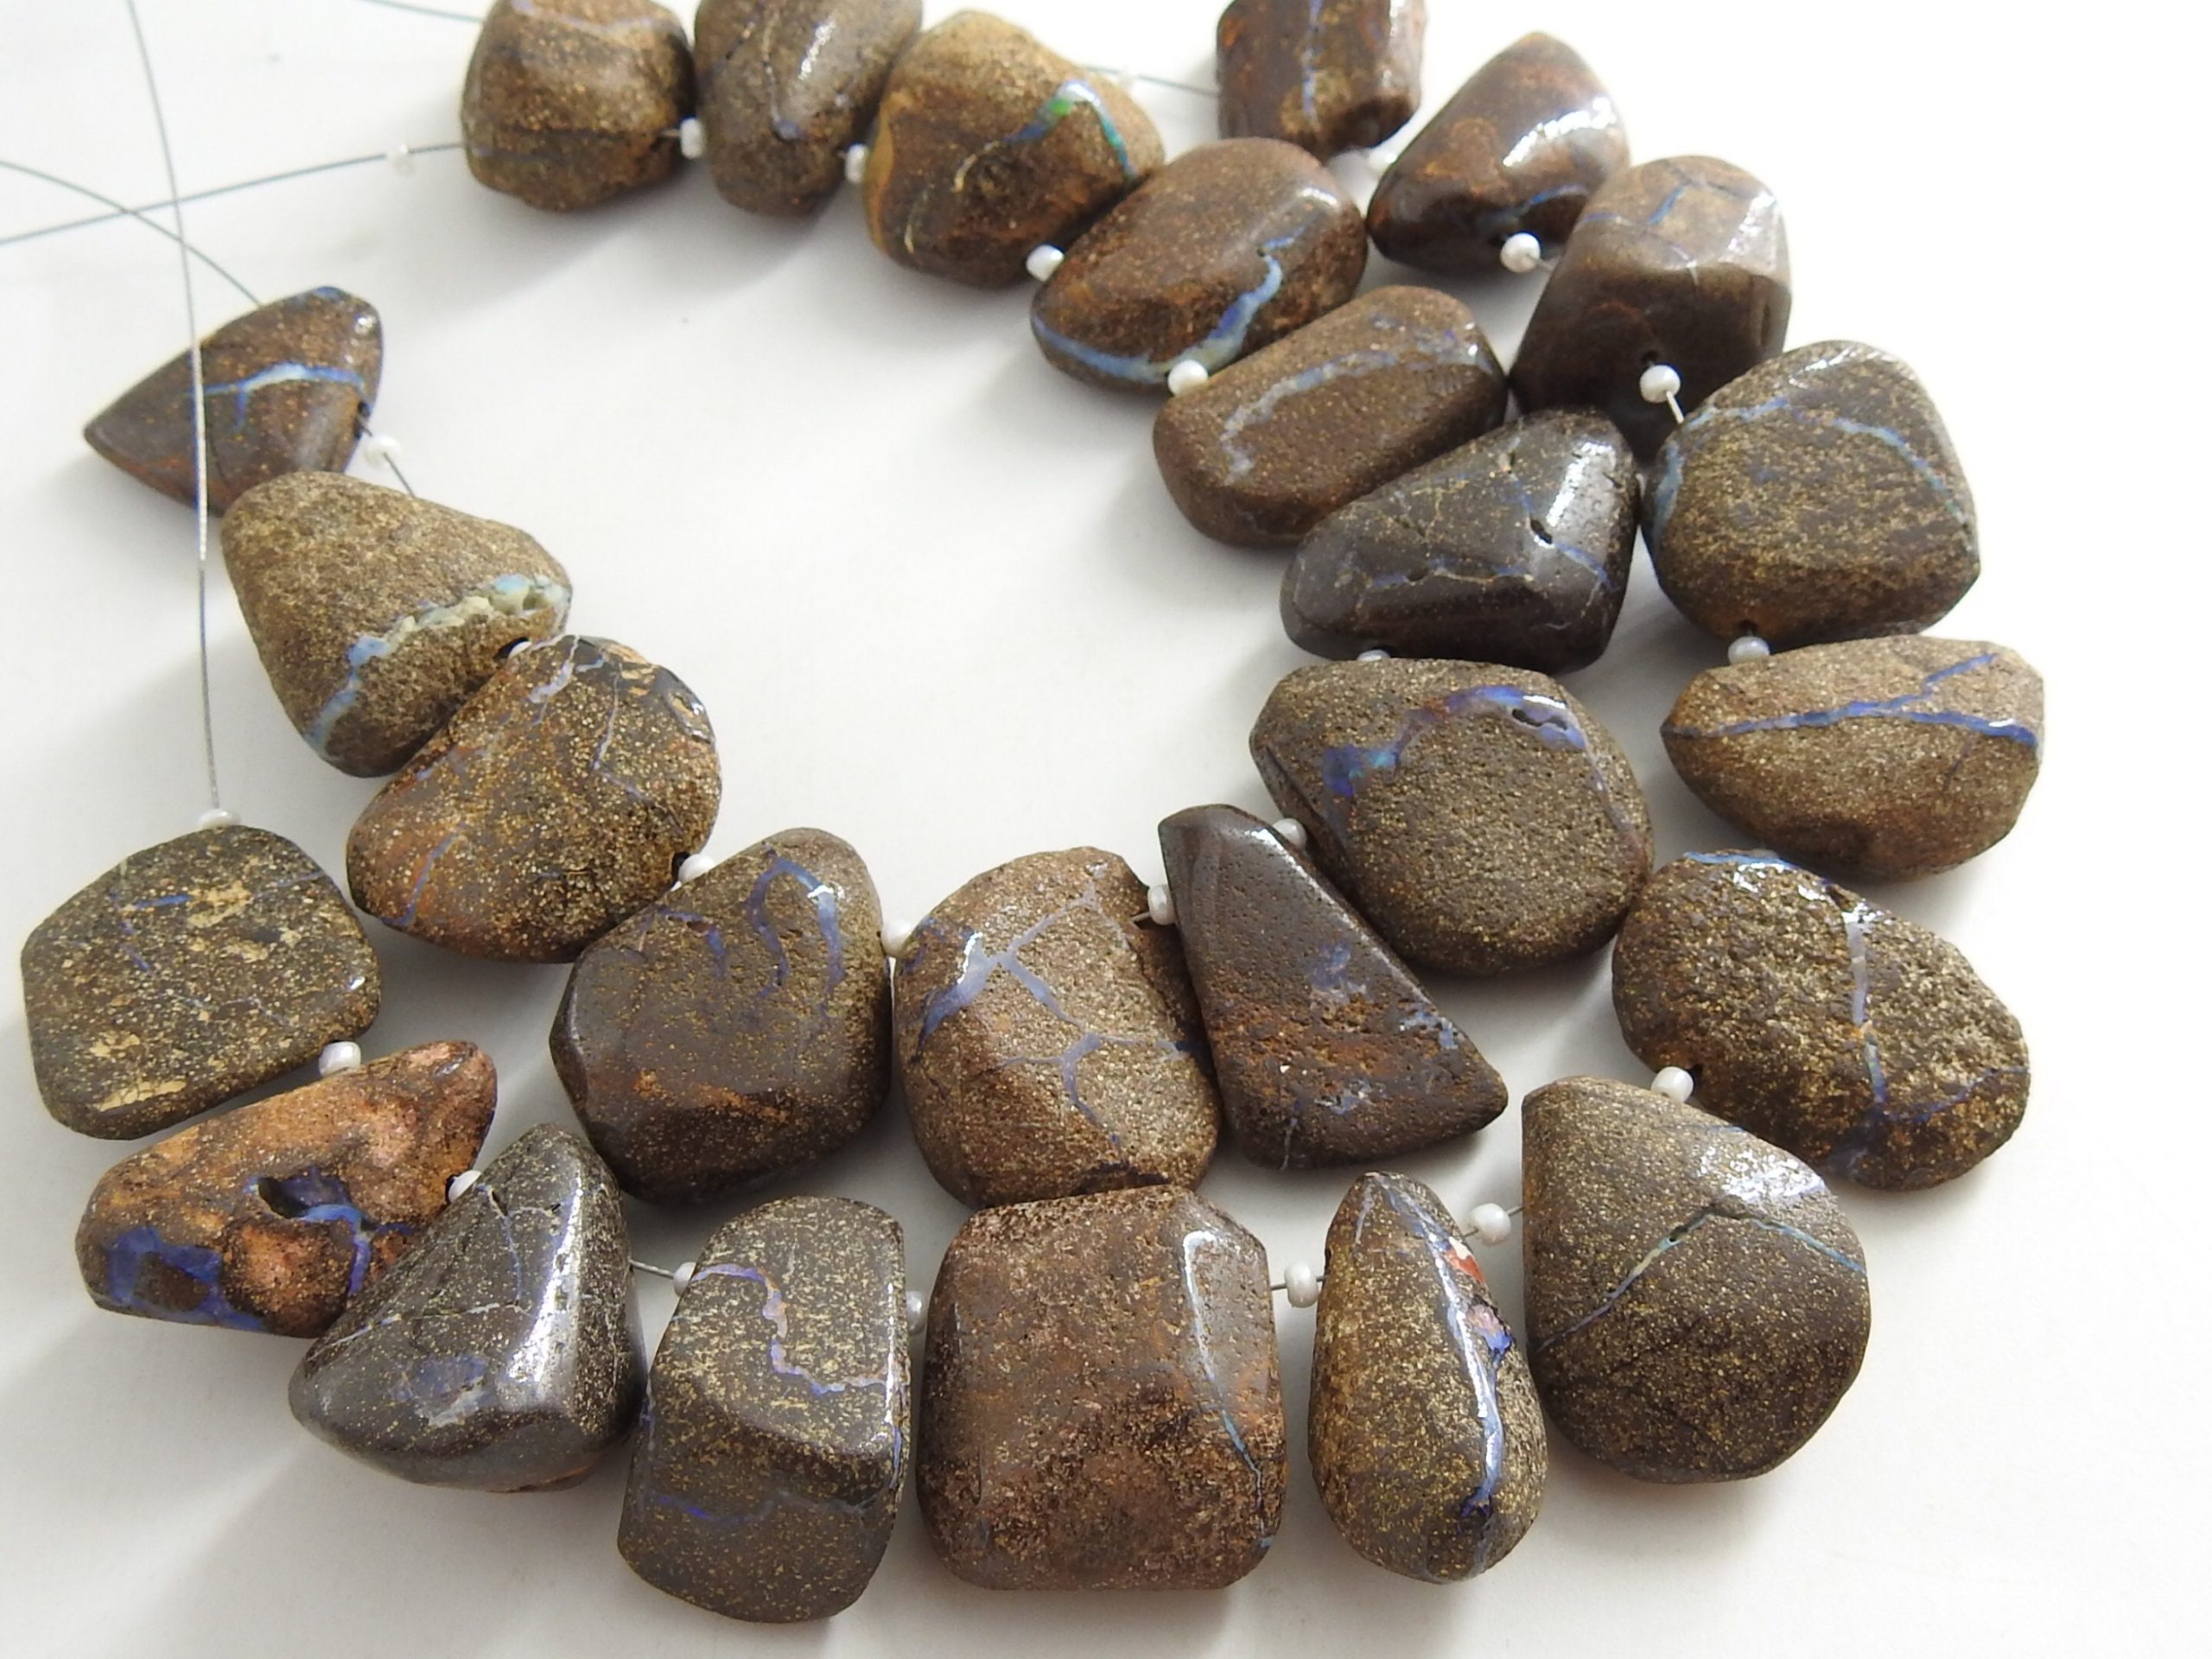 100%Natural Boulder Opal Smooth Fancy Briolette,Tumbke,Nugget,Irregular Shape Bead,Loose Stone,Minerals,Multi Fire 13Piece Strand (WM)R1 | Save 33% - Rajasthan Living 18